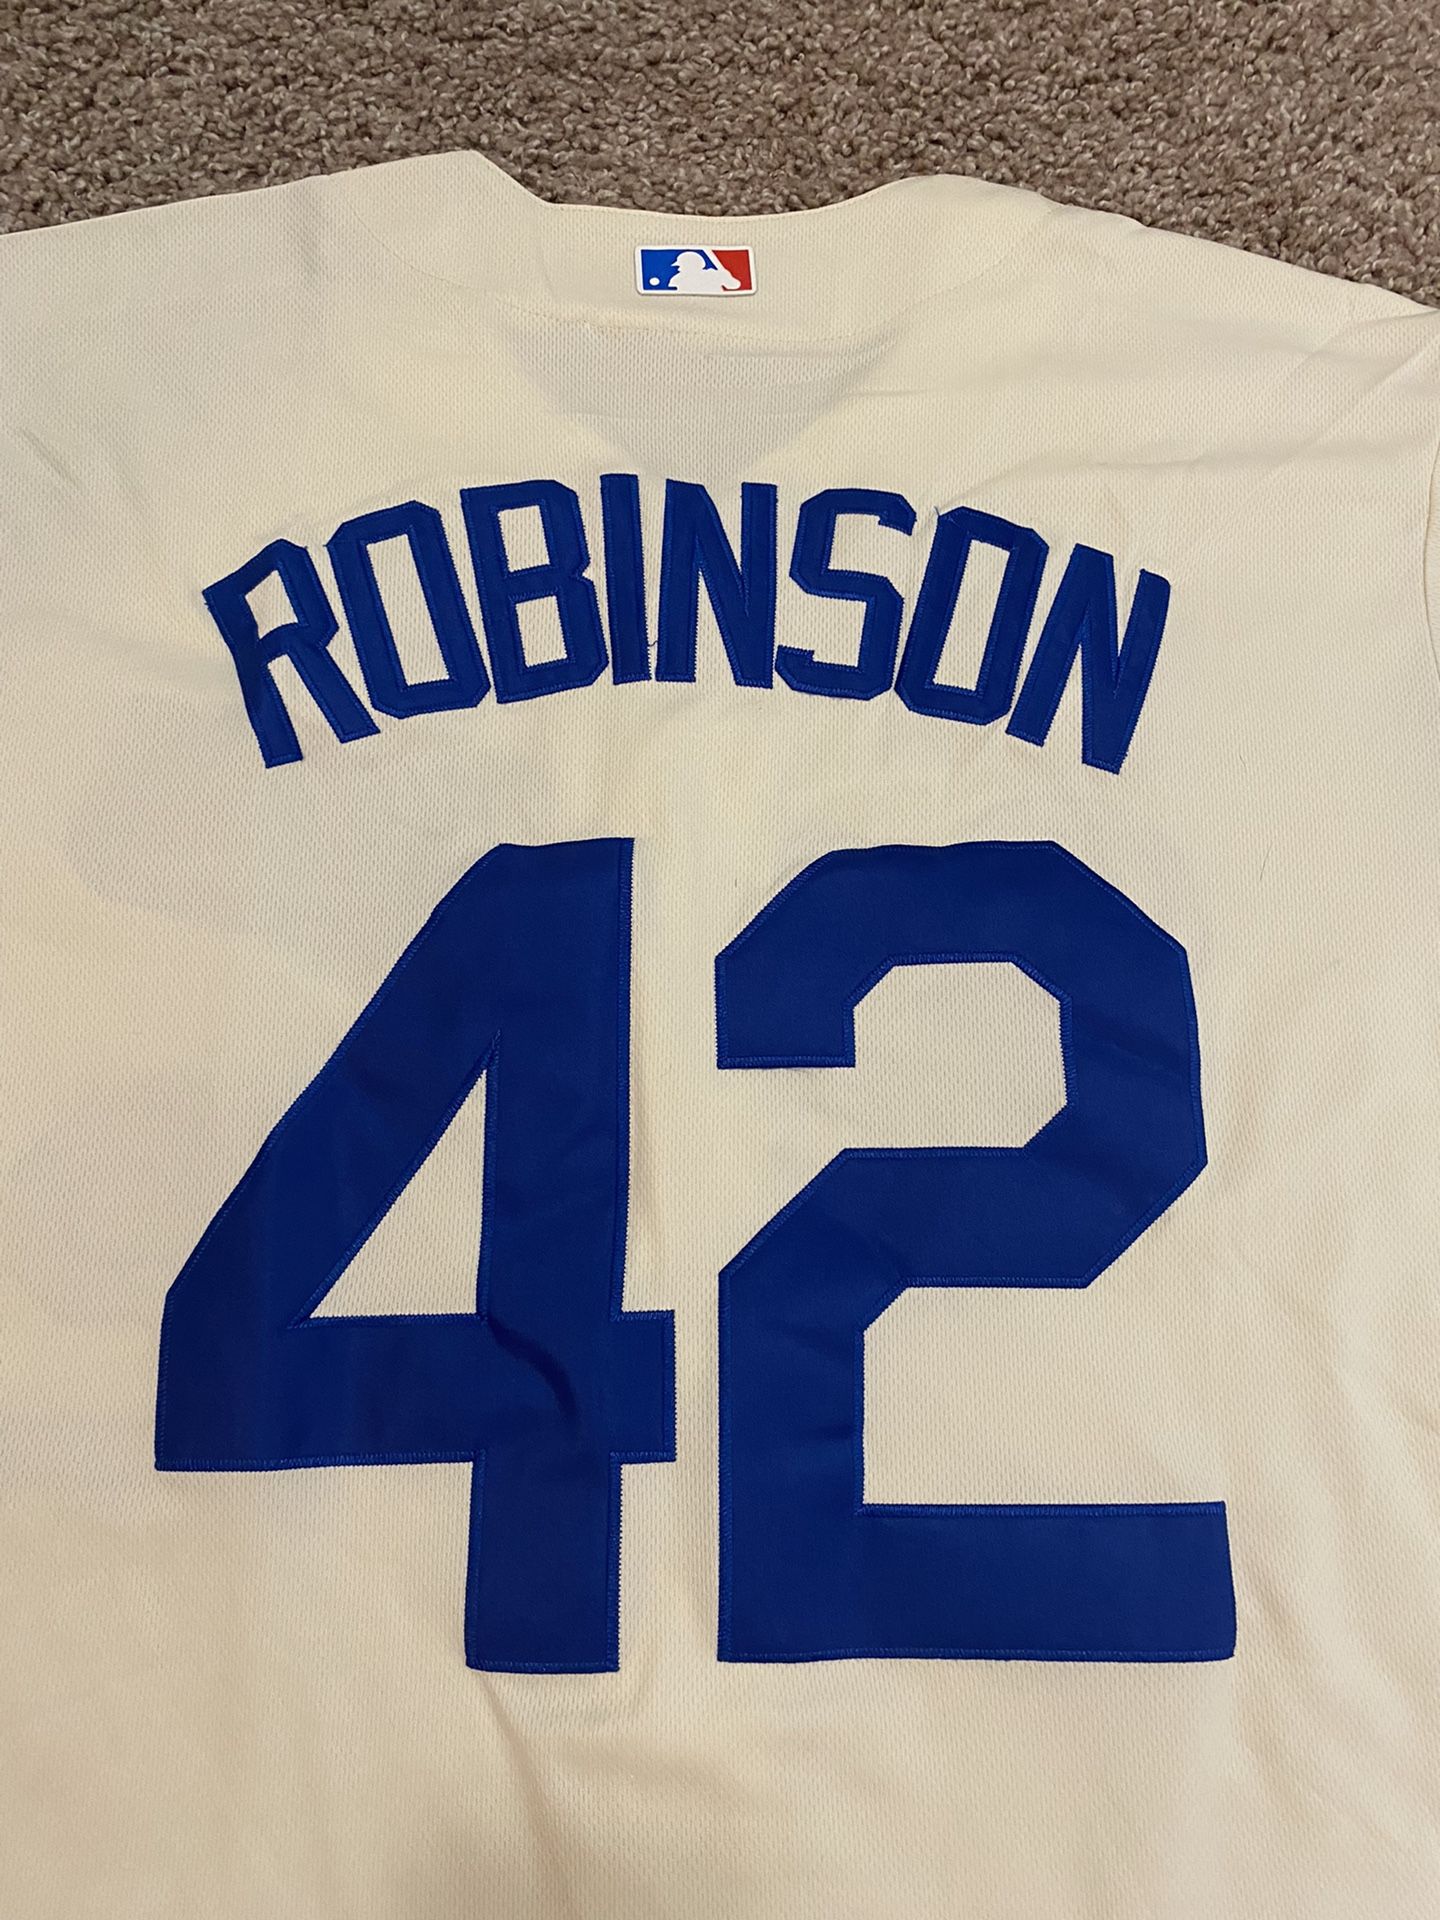 L.A Dodgers Jackie Robinson Jersey for Sale in Dallas, TX - OfferUp